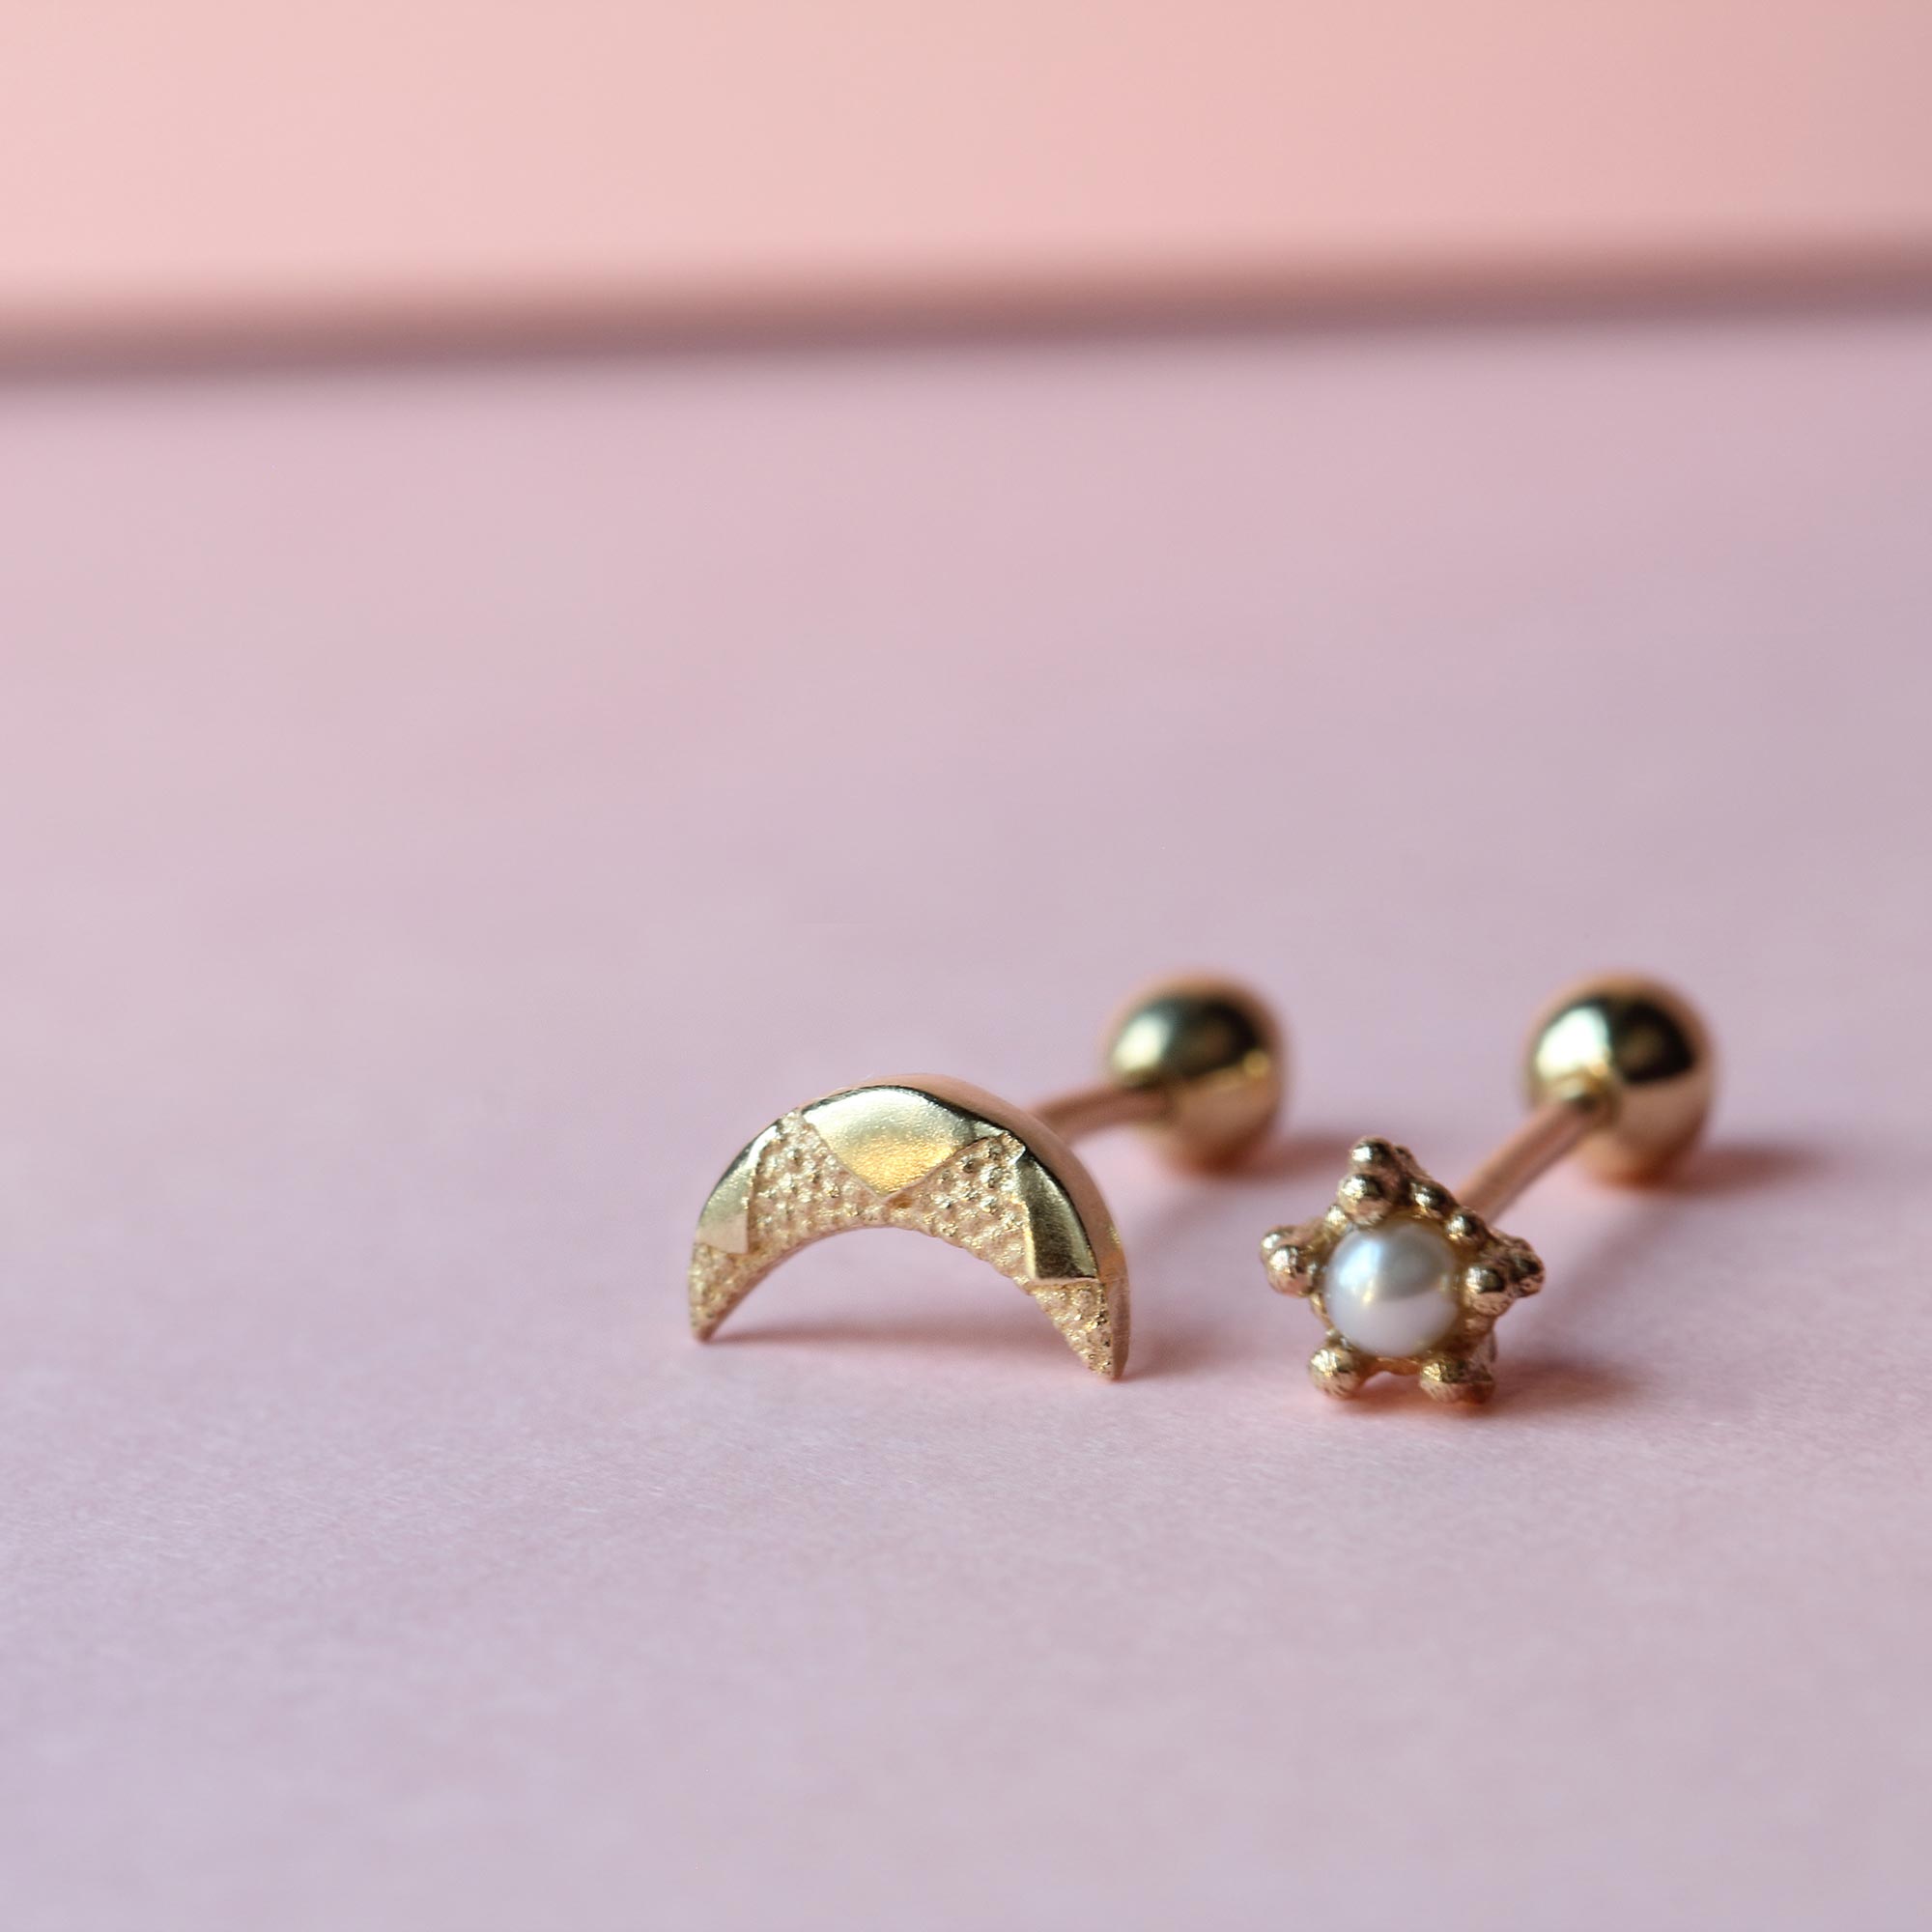 Tiny moon and tiny pearl stud earrings on pink background